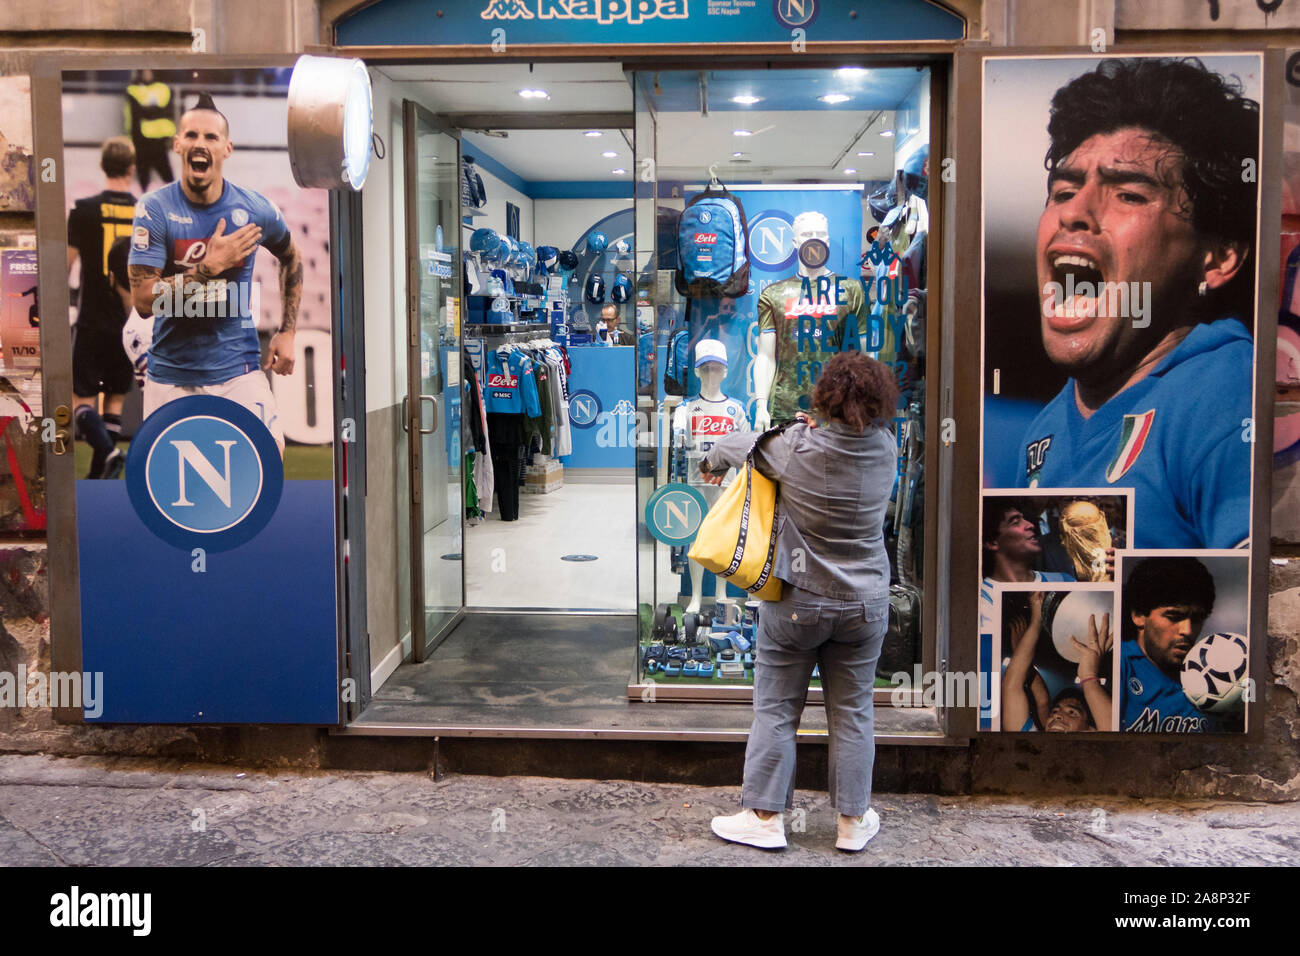 A view of SSC Napoli official store in Naples Stock Photo - Alamy